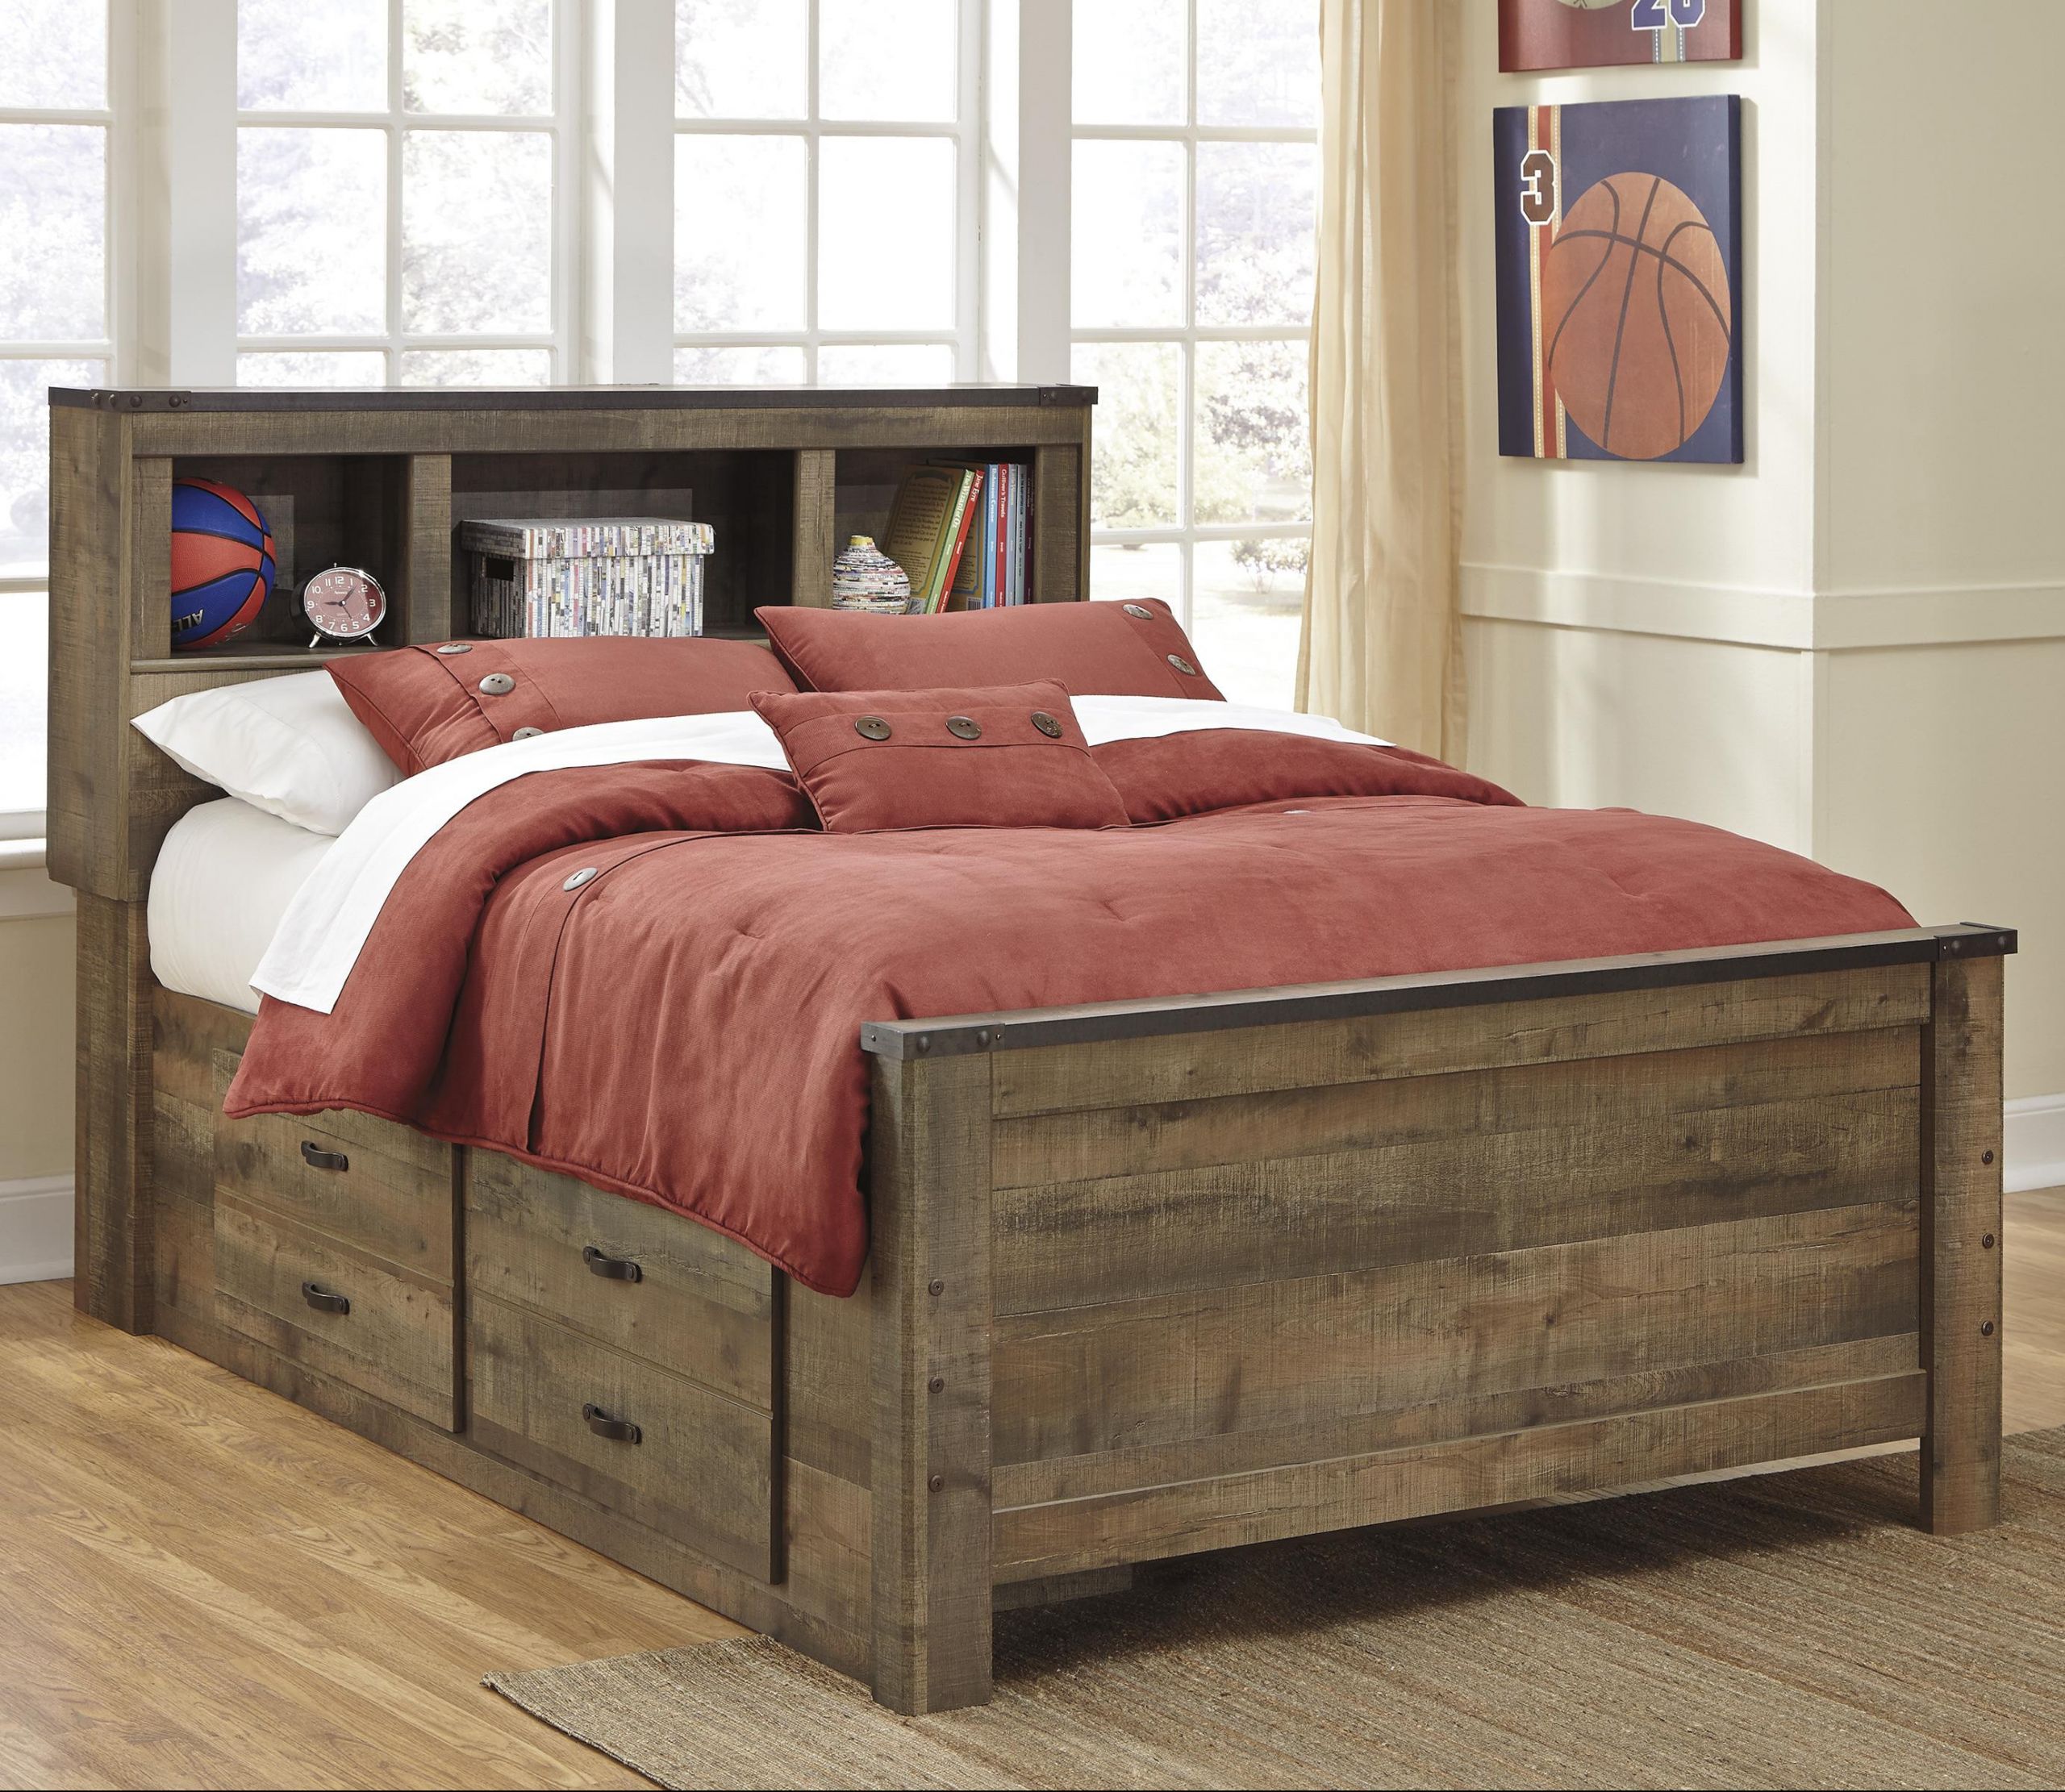 Full Size Storage Bedroom Sets
 Signature Design by Ashley Trinell Rustic Look Full